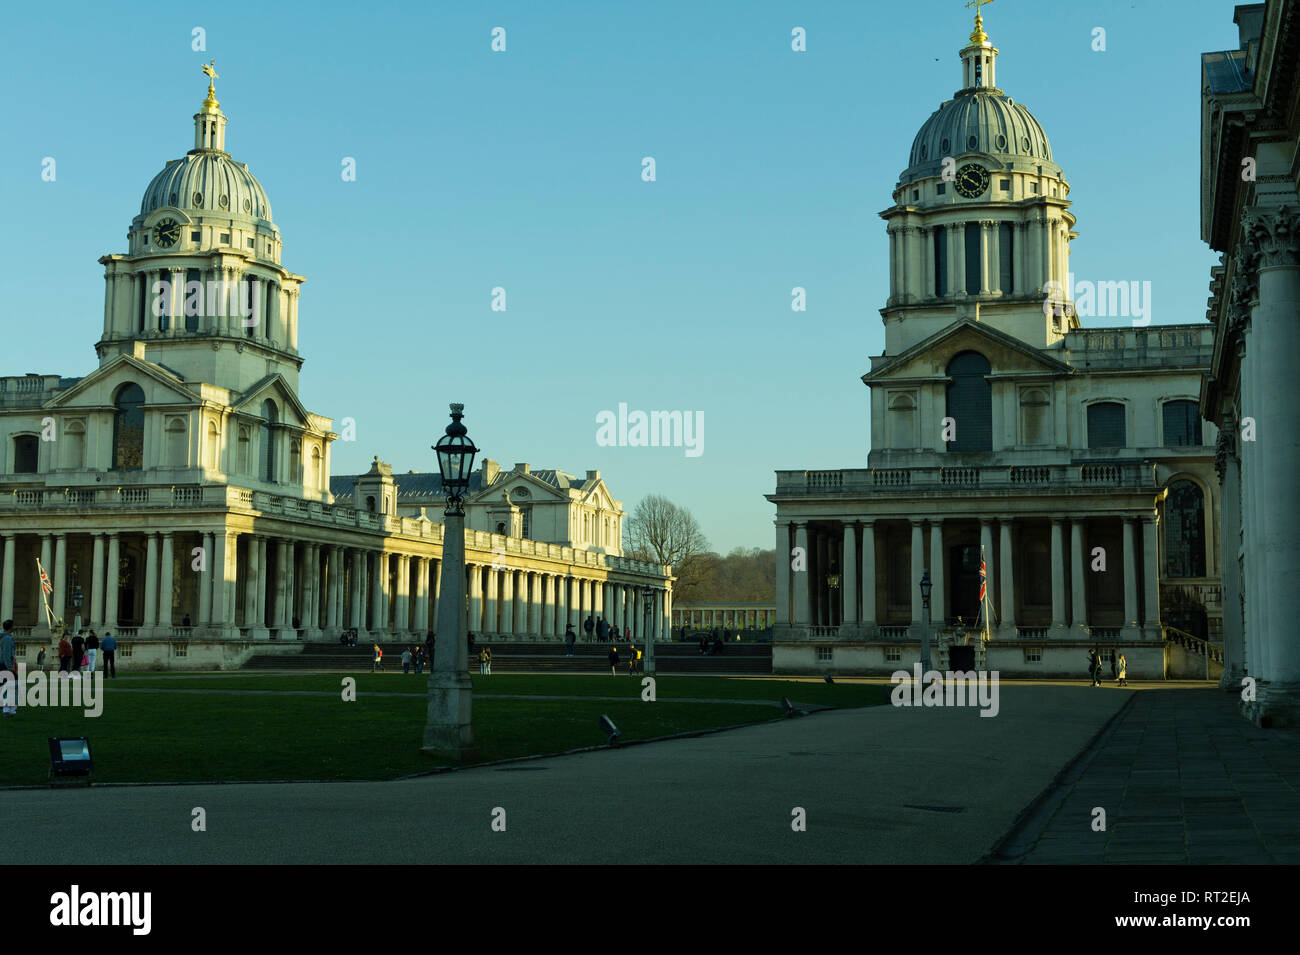 The Old Royal Navy College, Greenwich, London, UK Stock Photo